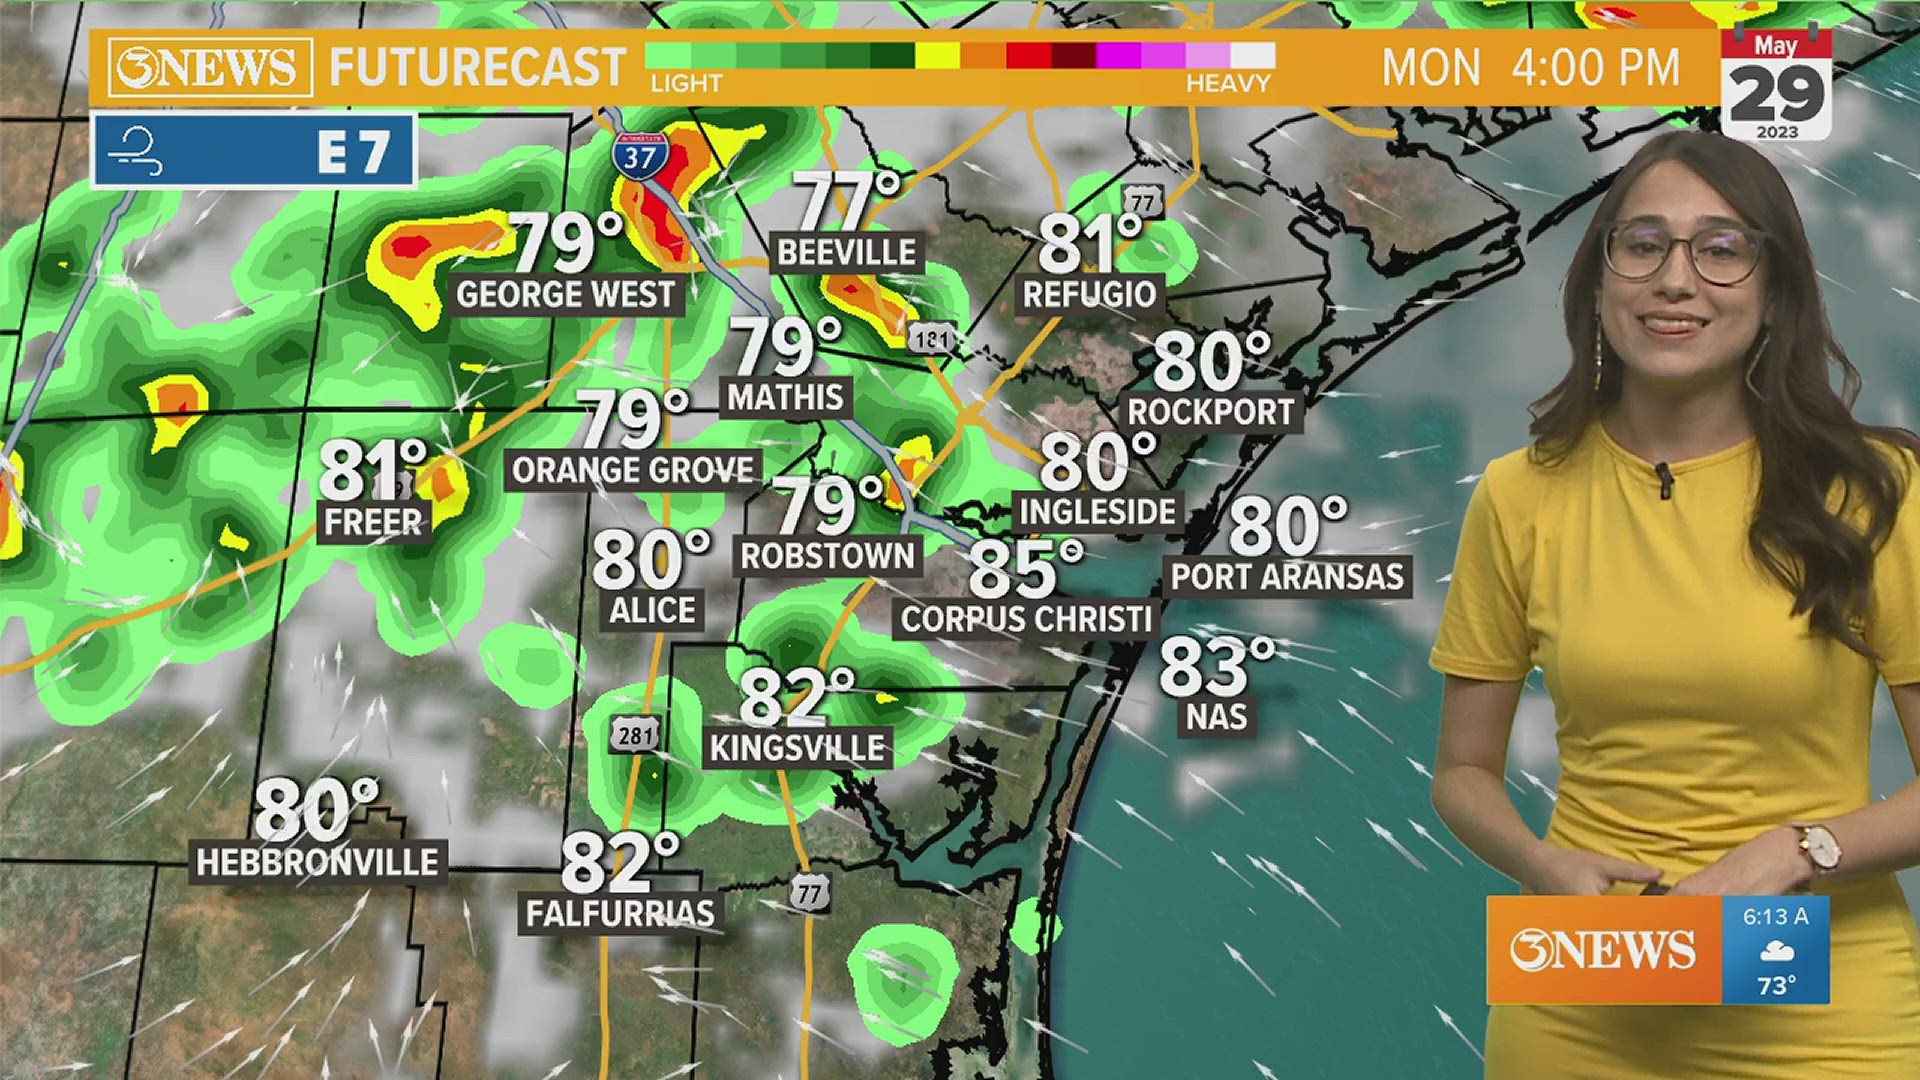 Clouds and rain chances increase heading into the back half of the Memorial Day weekend. Skies clear and temps jump back into the low 90s late next week.